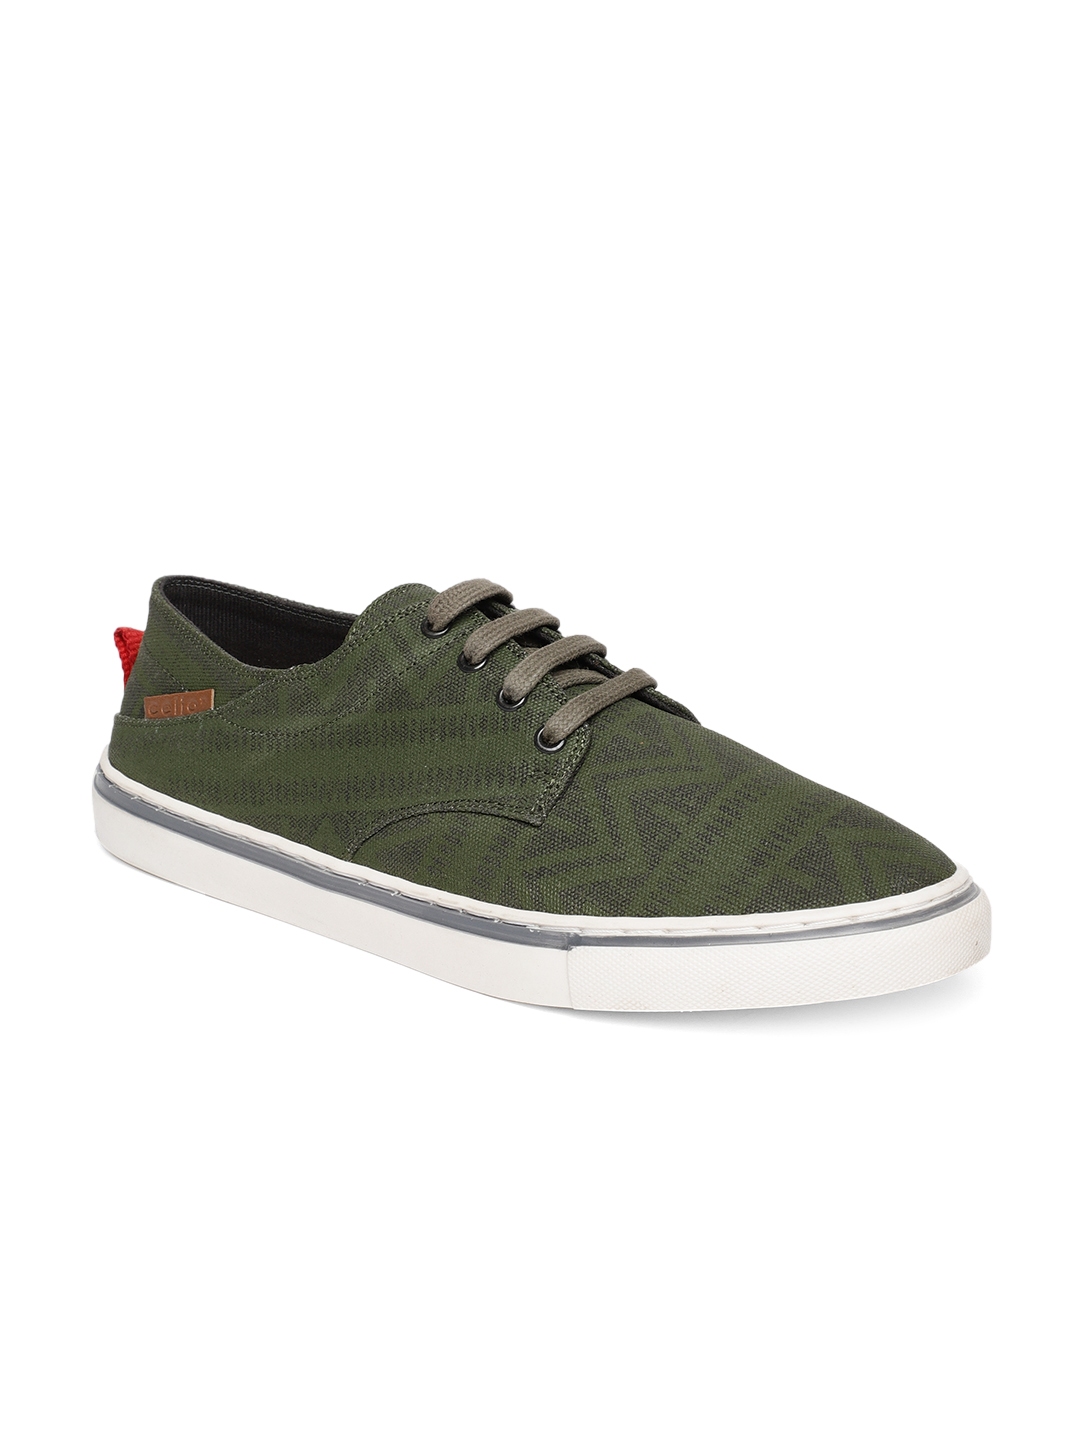 Buy Celio Men Olive Green Sneakers - Casual Shoes for Men 9041131 | Myntra